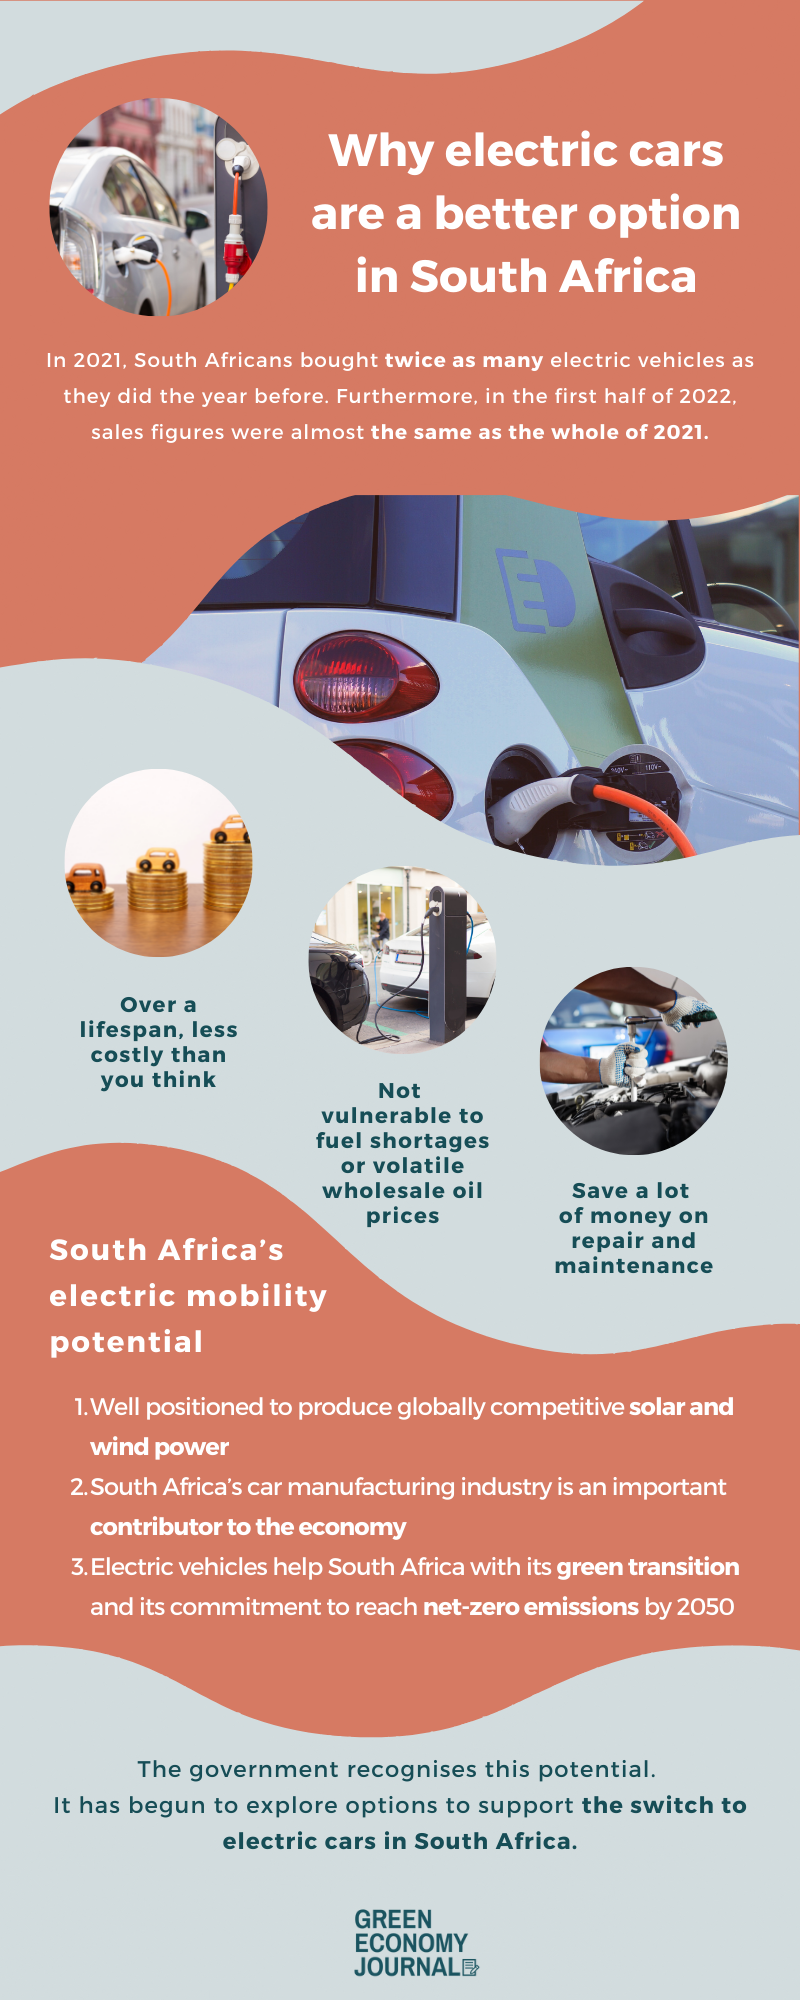 Why electric cars are a better option in South Africa